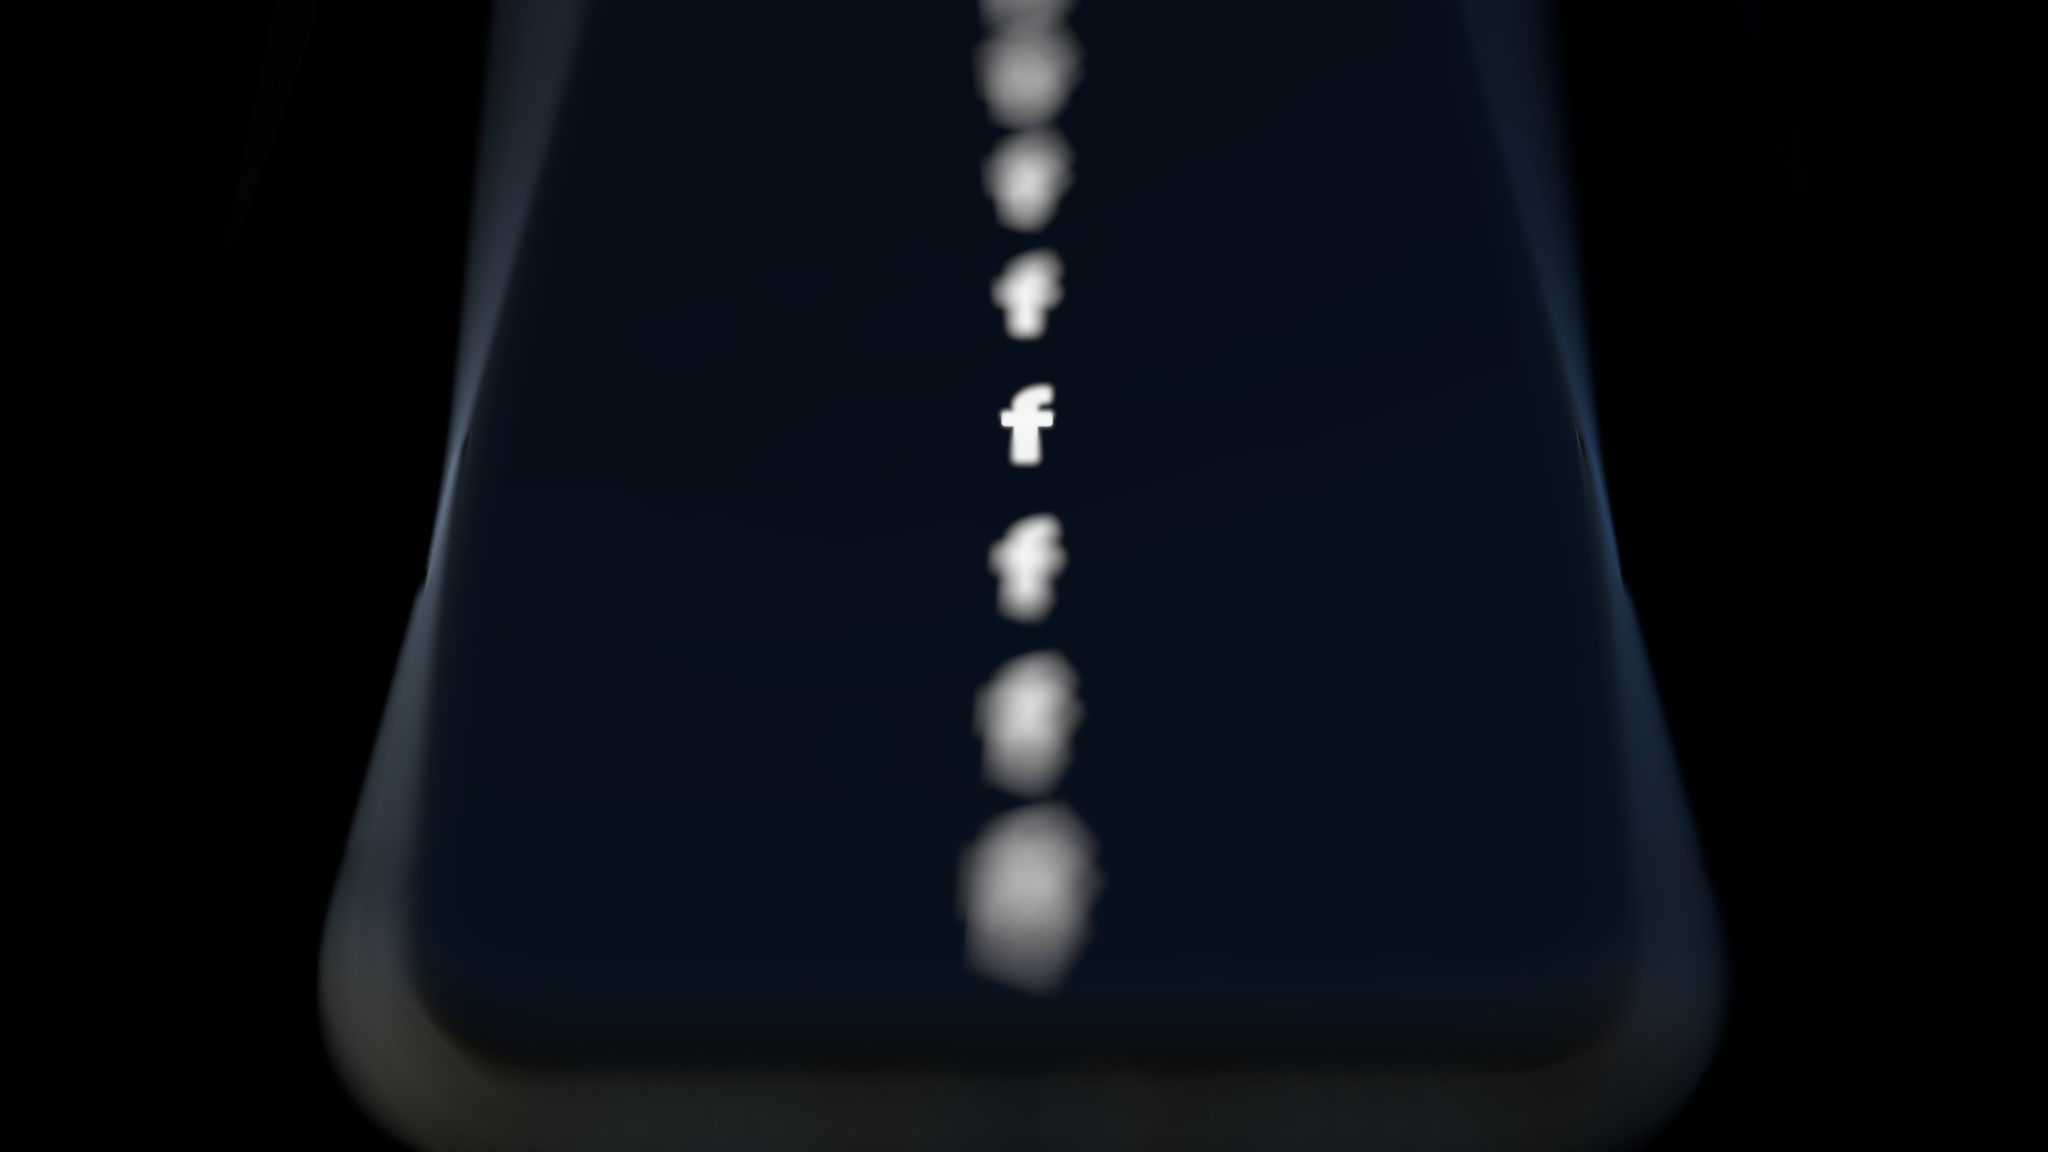 An iPhone mockup showing a high degree of depth of field